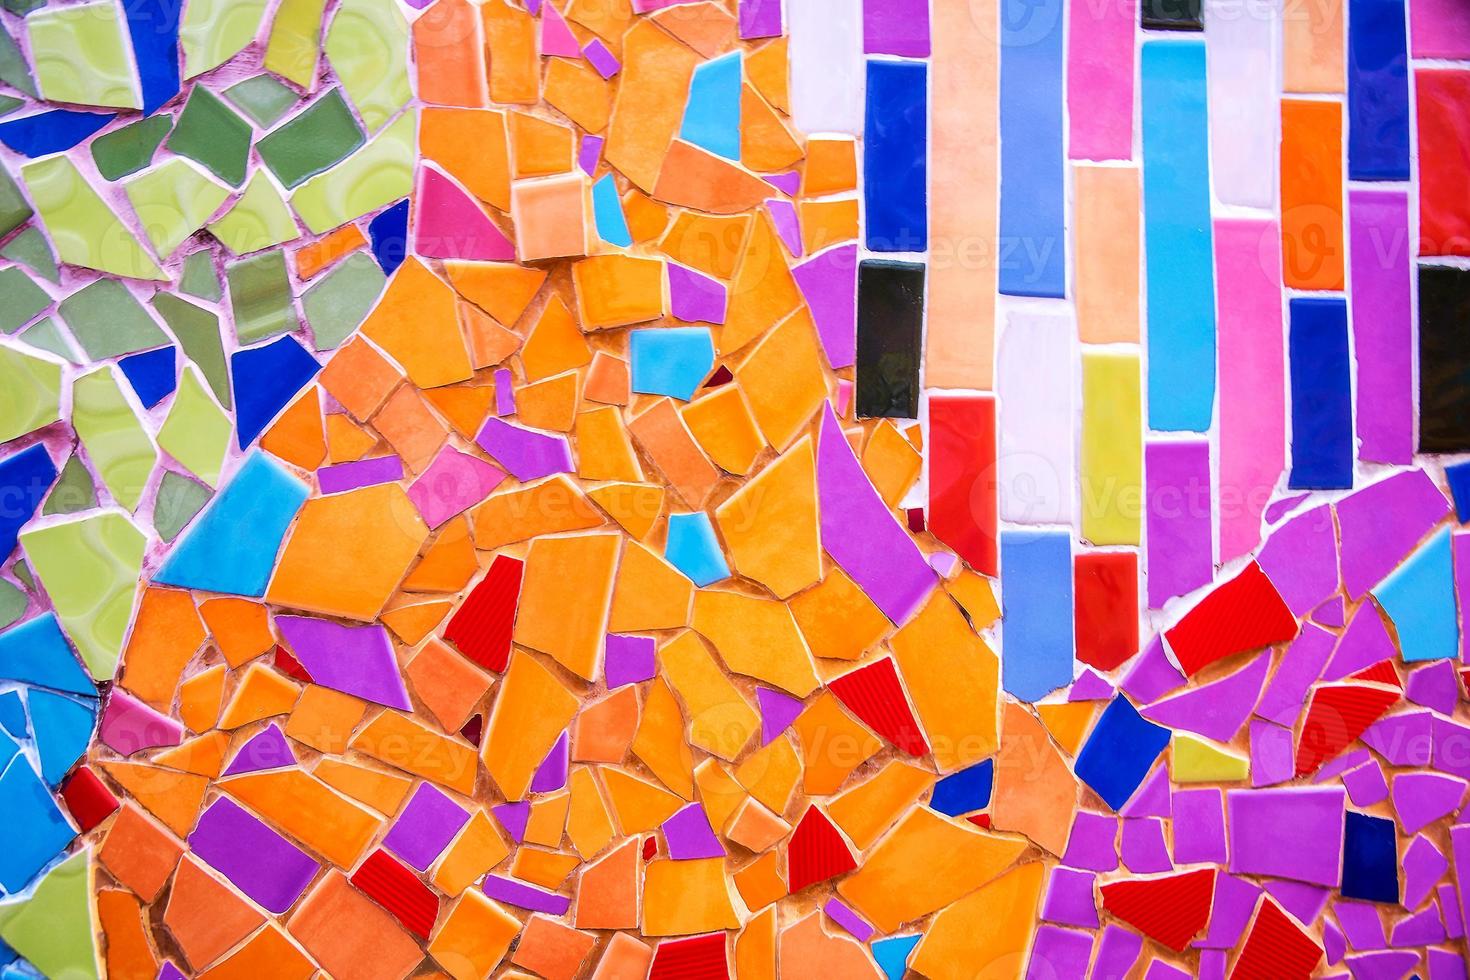 Colorful mosaic abstract background. photo